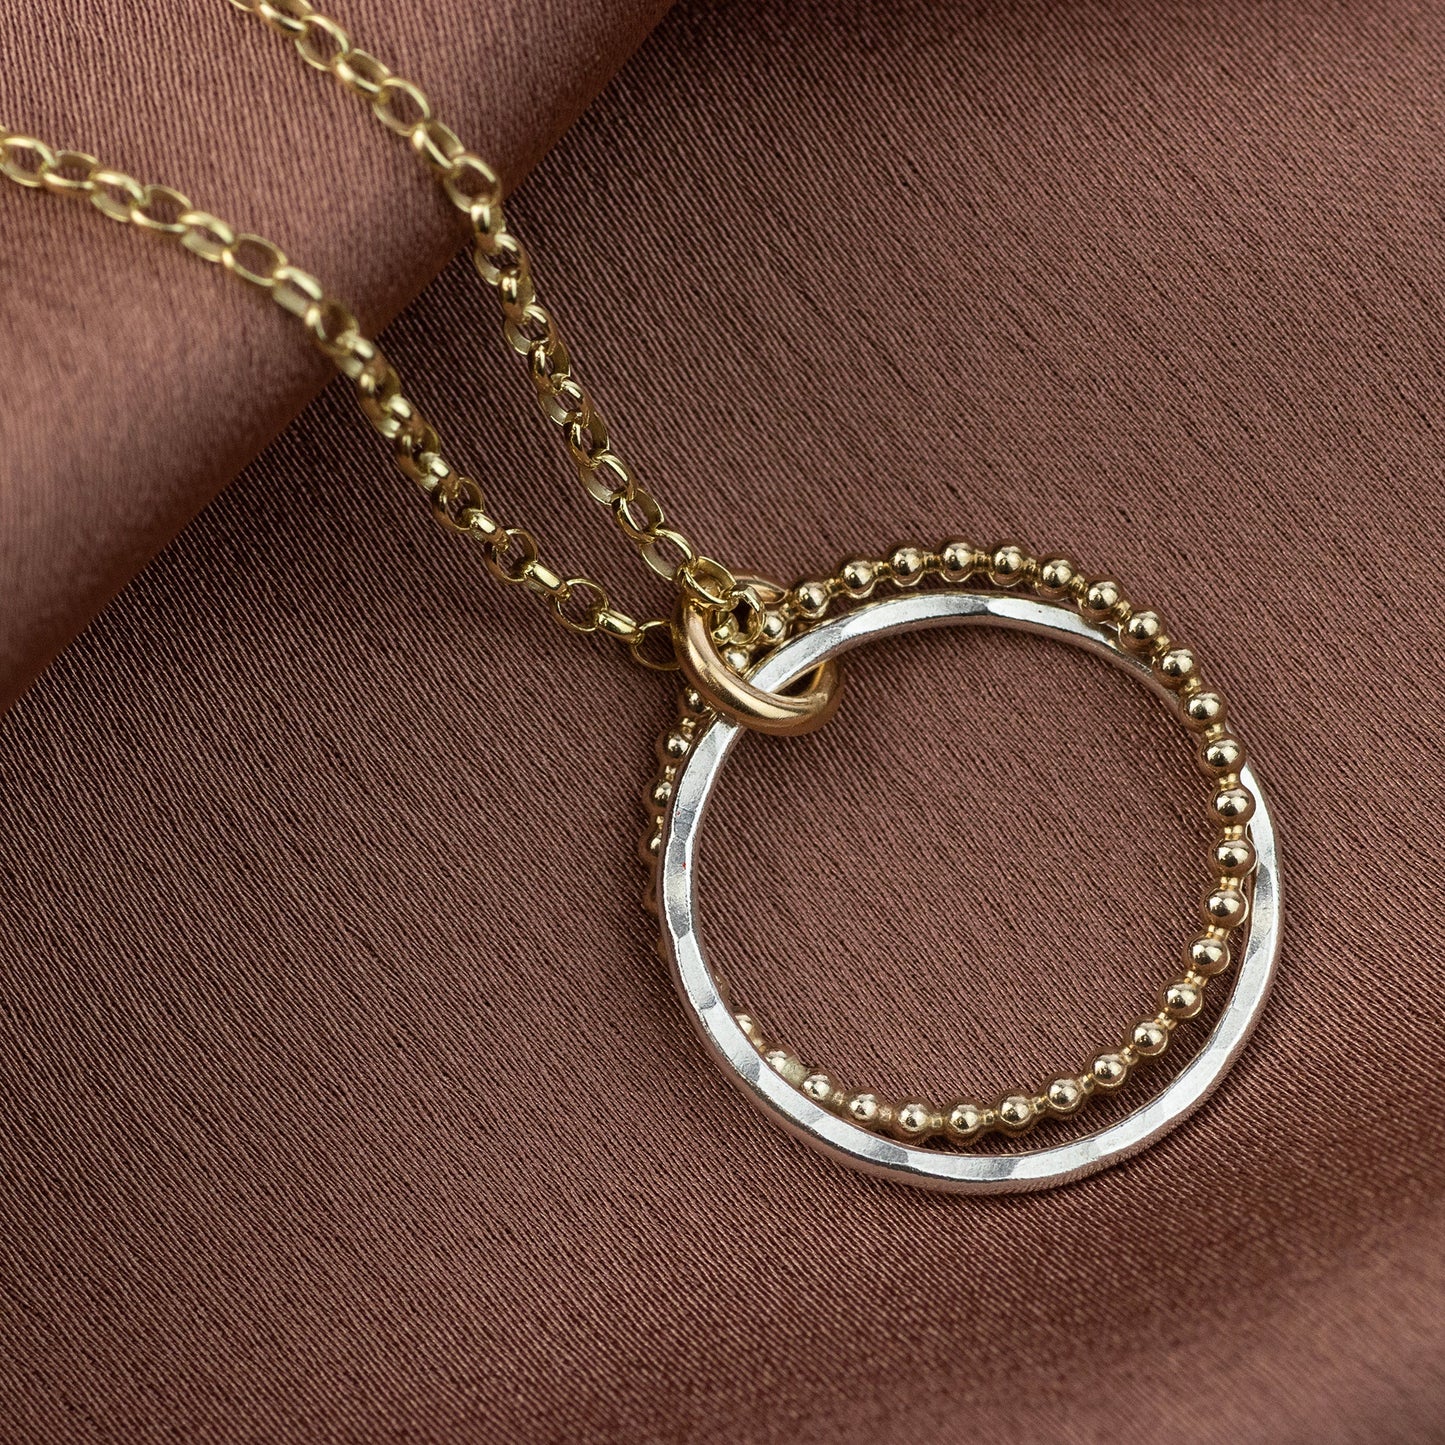 Gift for Grandmother from Grandson - 9kt Gold & Silver Necklace